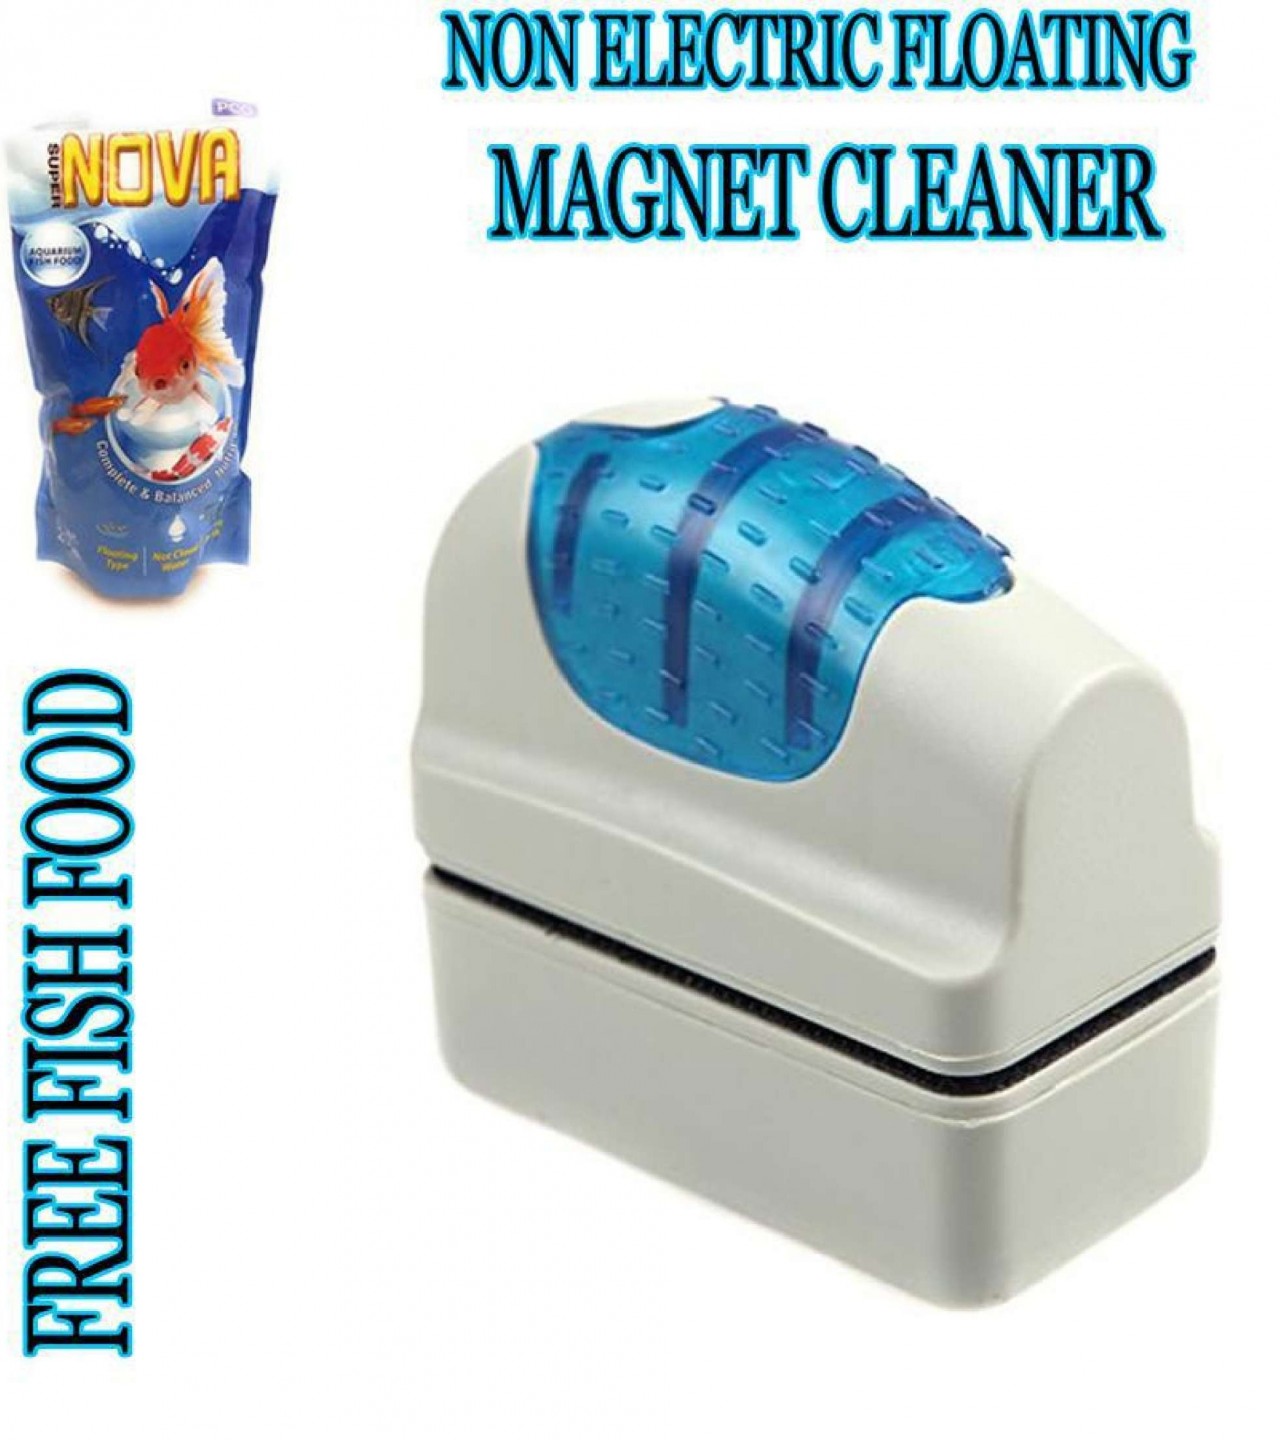 Rs Electrical Non Electric Floating Magnet Cleaner Rs 09